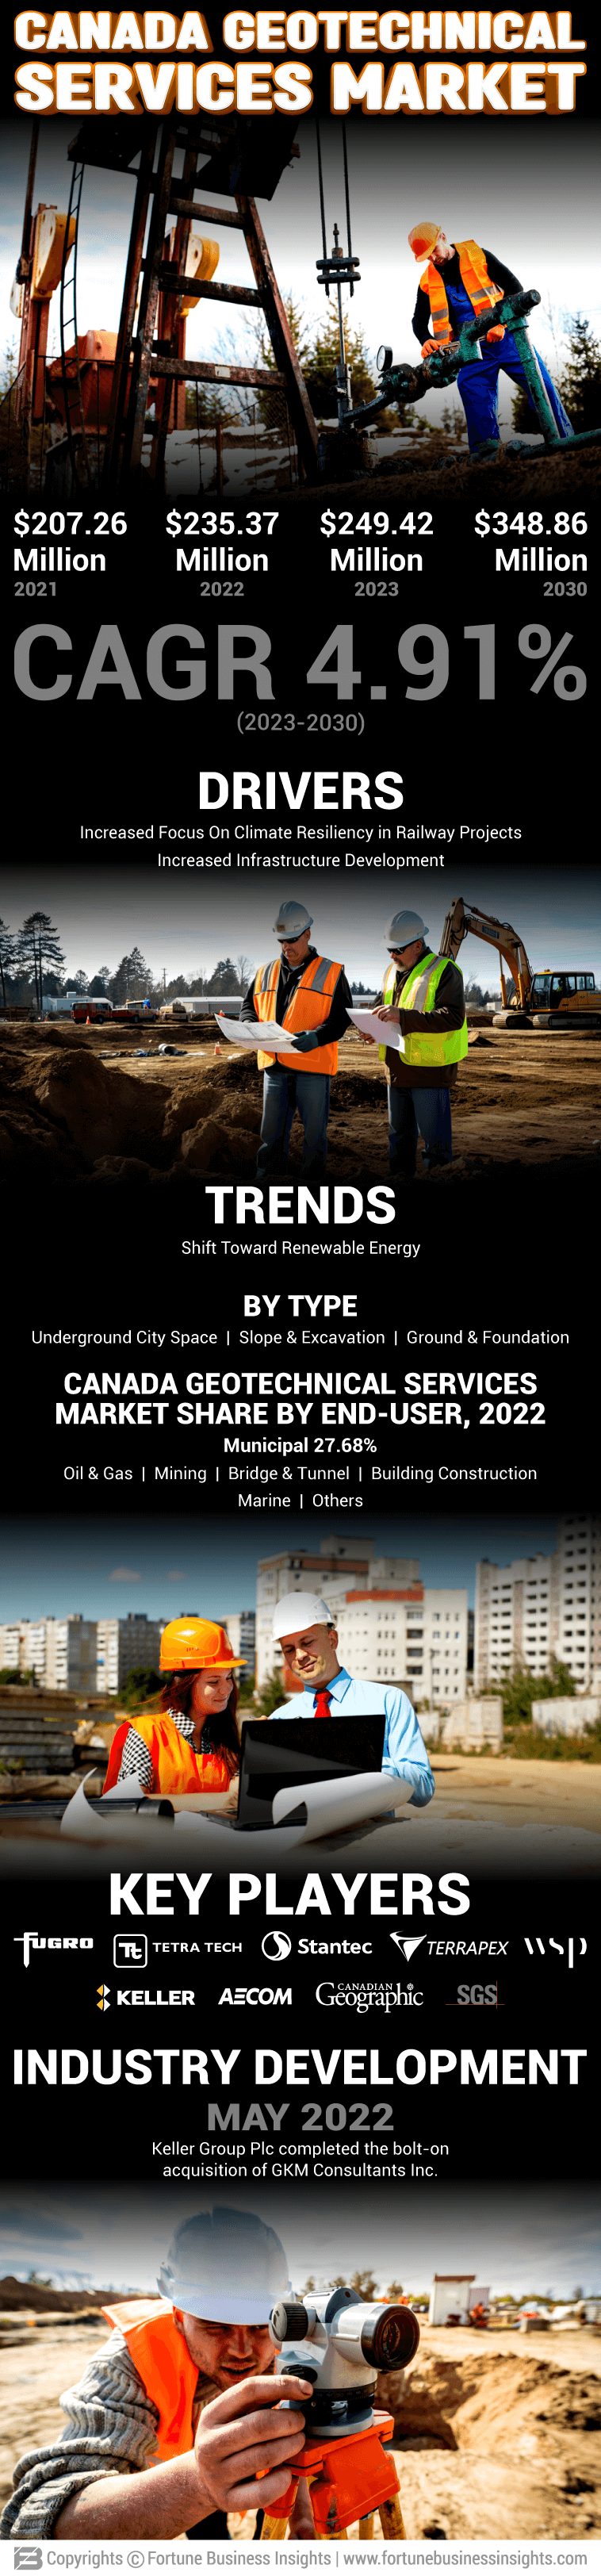 Canada Geotechnical Services Market